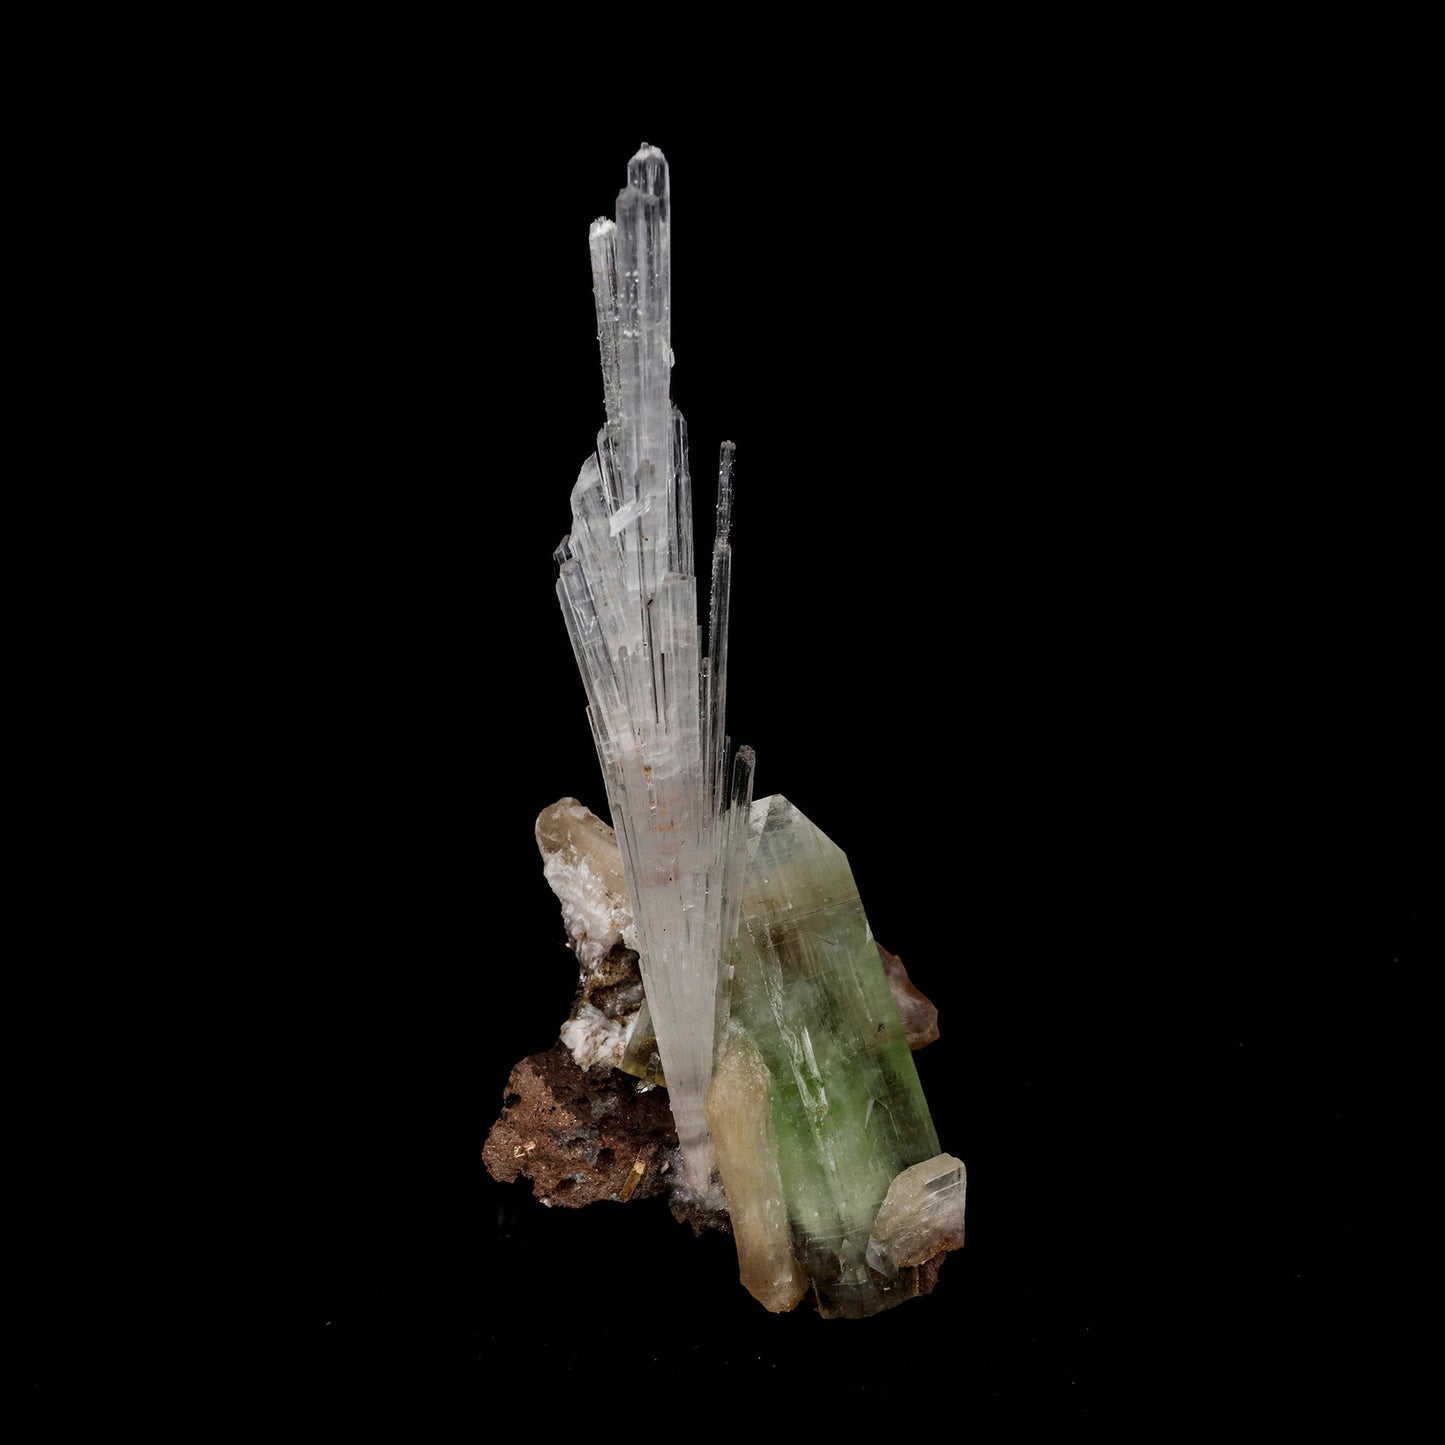 Scolecite Spray With Gren Apophyllite, Stilbite Natural Mineral Specim…  https://www.superbminerals.us/products/scolecite-spray-with-gren-apophyllite-stilbite-natural-mineral-specimen-b-5270  Features: This is a beautiful cluster of pseudo-cubic Apophyllite crystals and lustrous peach stilbite. Large Apophyllite crystals show interesting zoning with bands of colors from apple green at the base of the crystals to clear at the top. Primary Mineral(s): Apophyllite Secondary Mineral(s): Stilbite